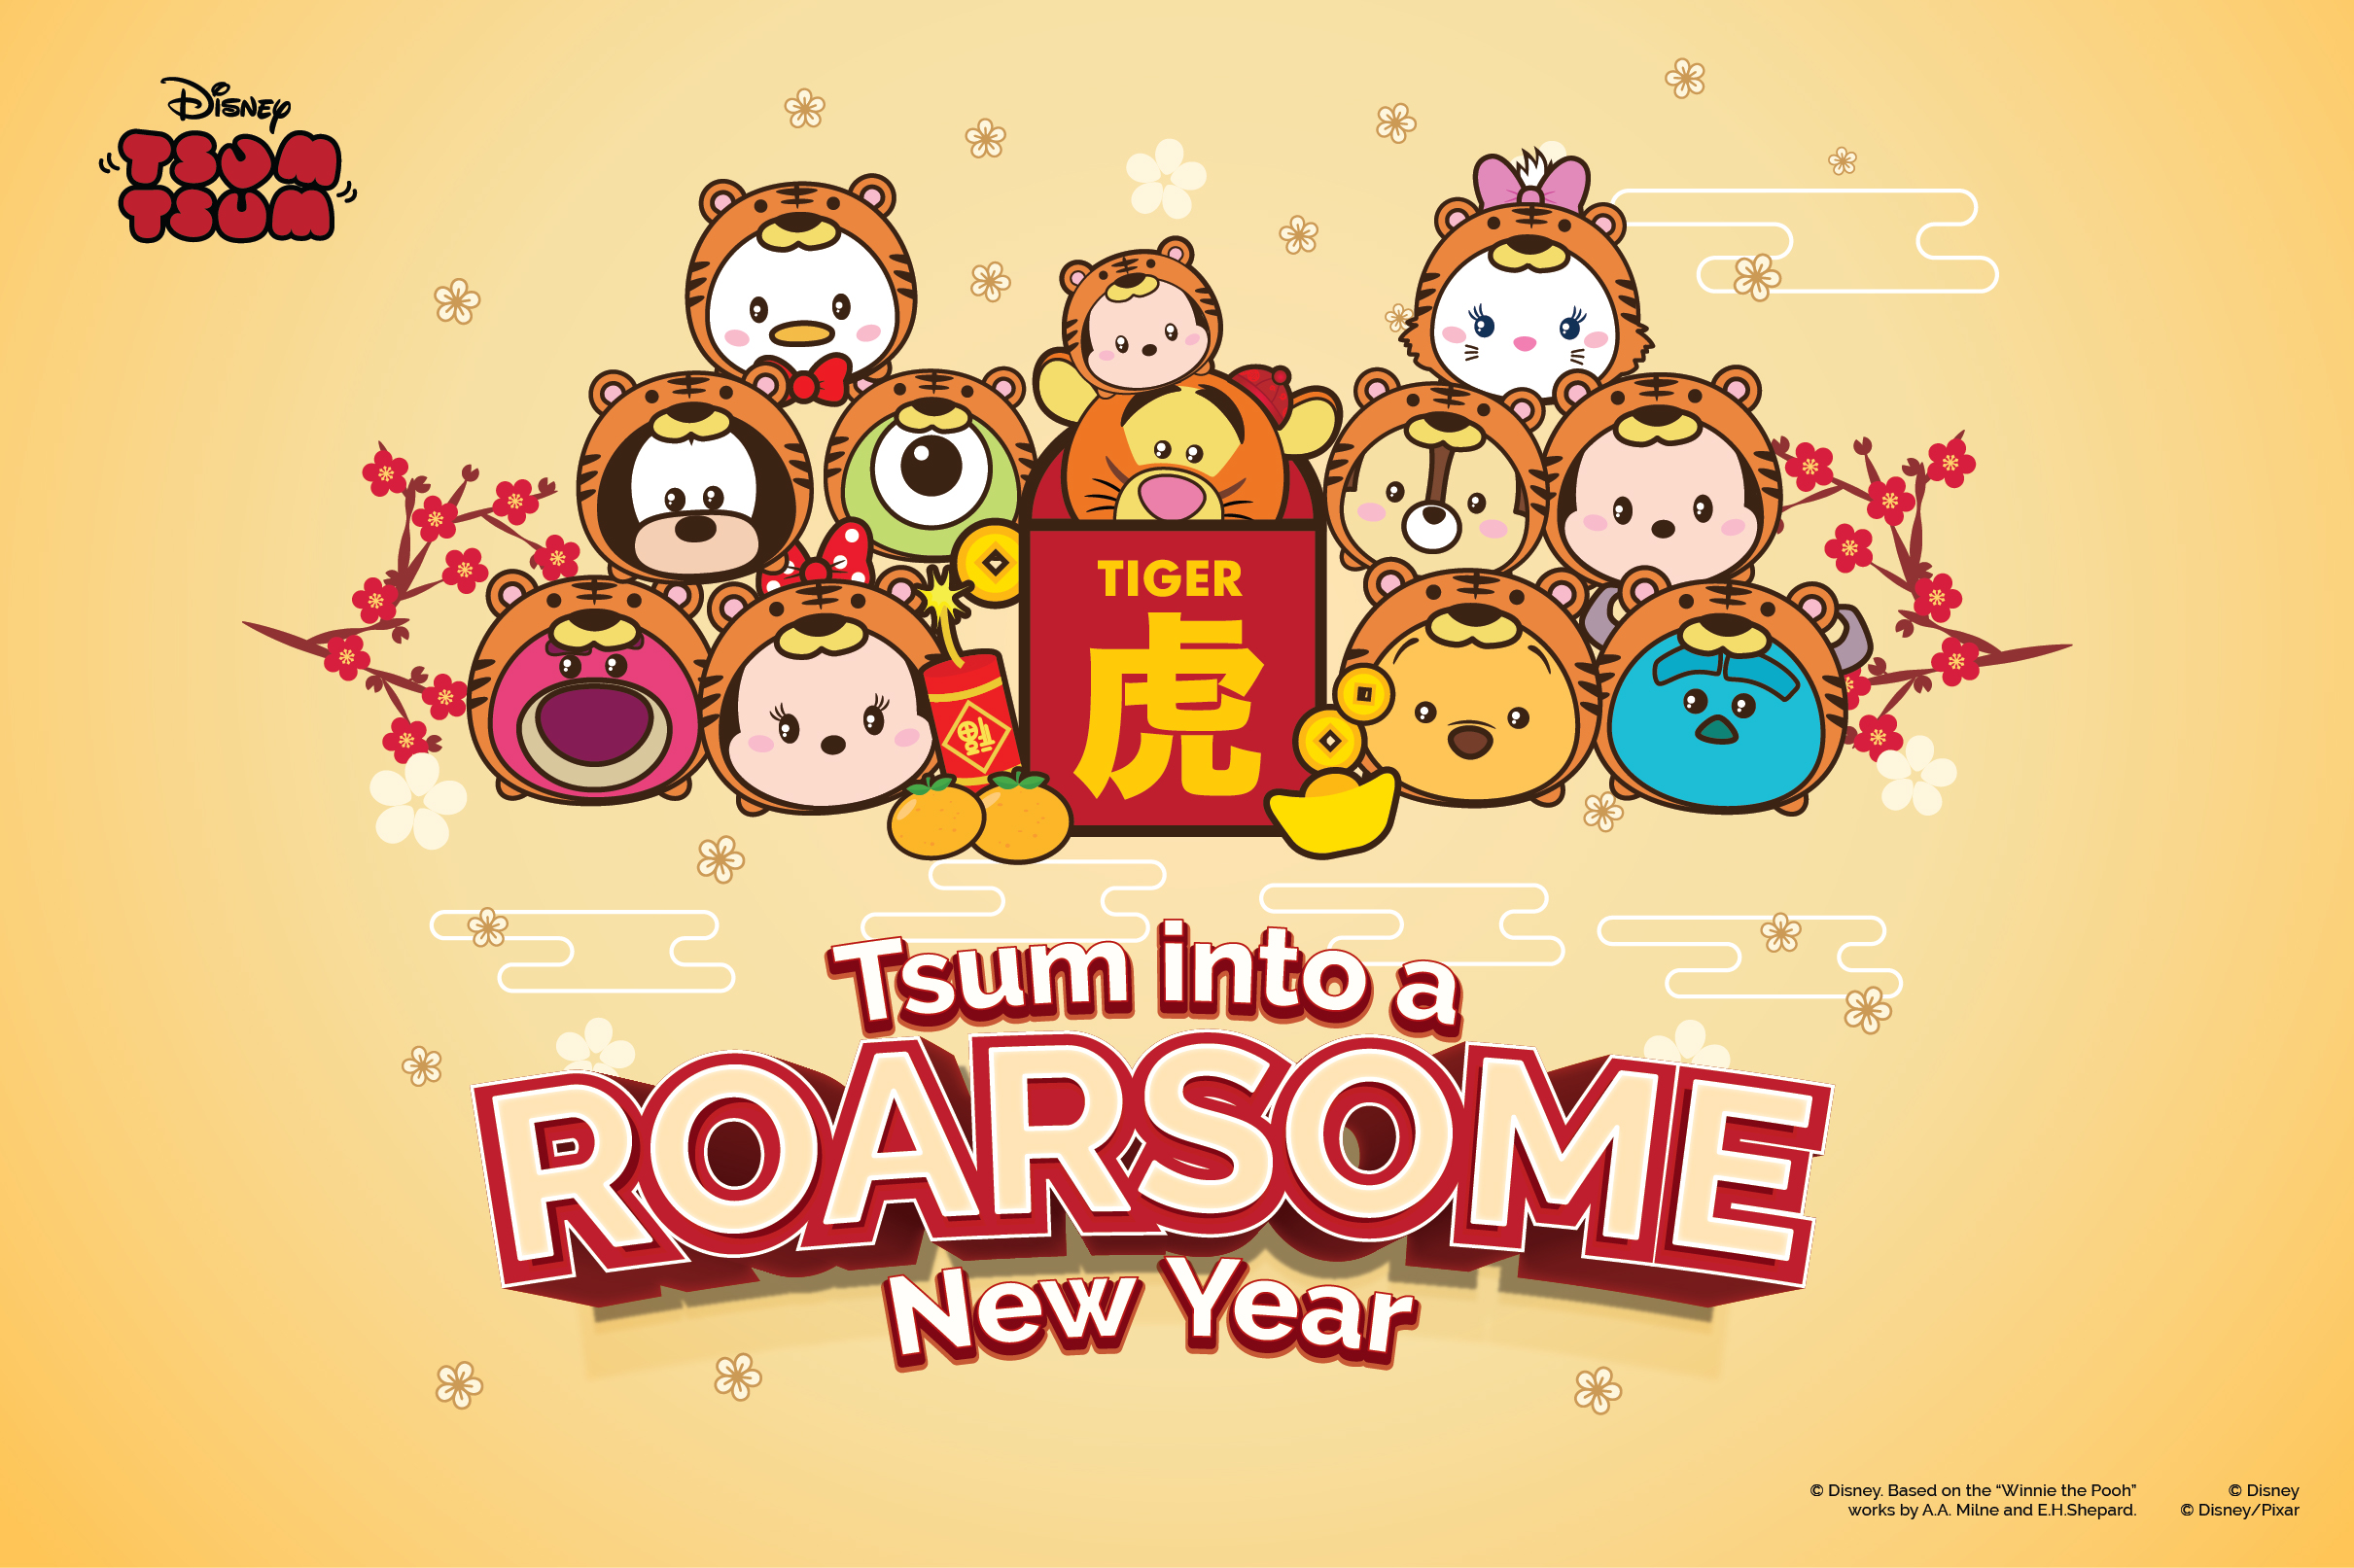 Tsum into a roarsome new year